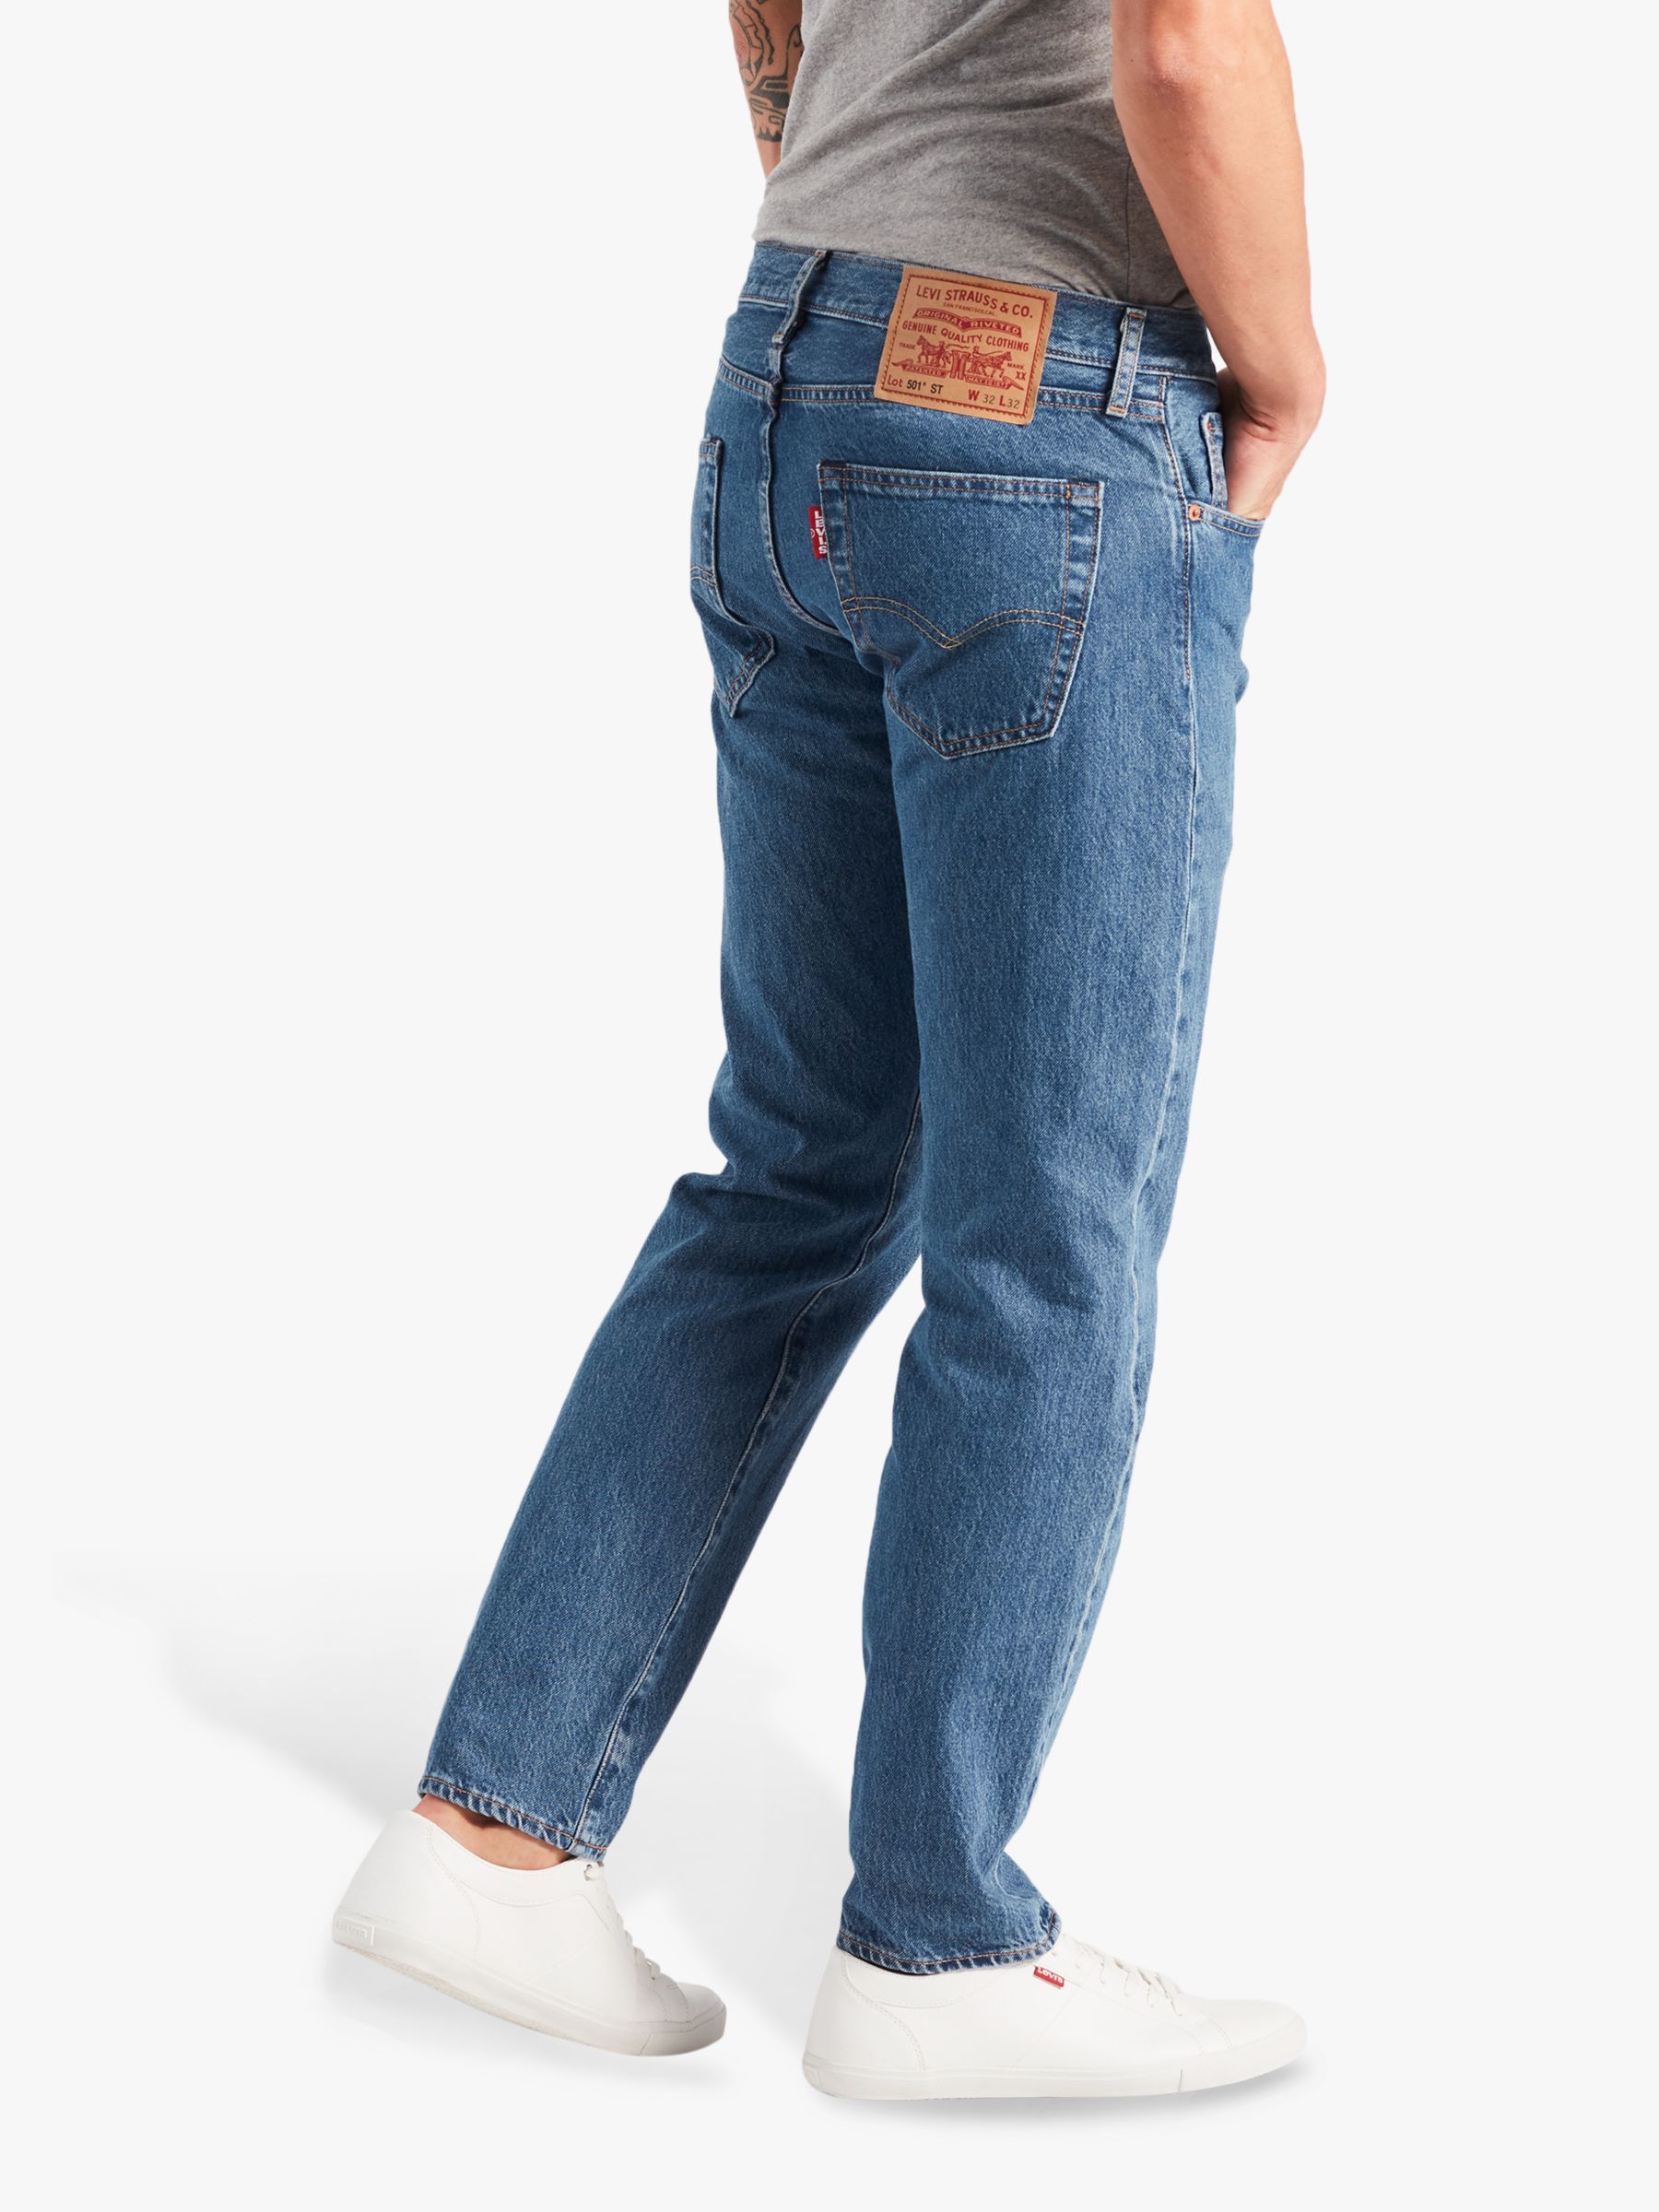 levis tapered 501